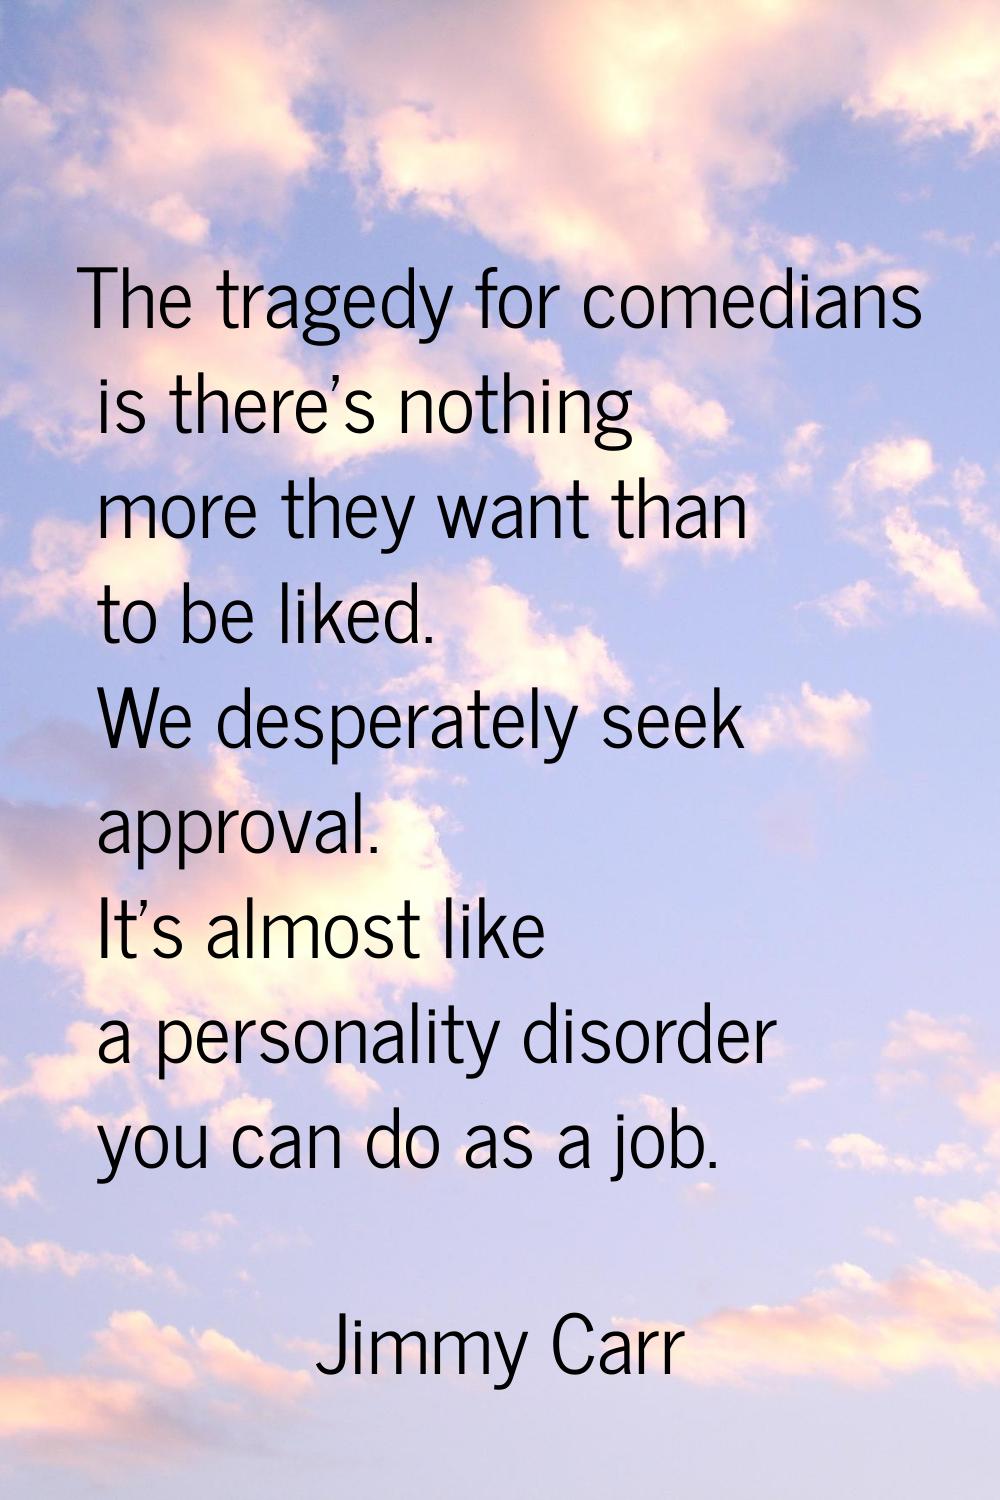 The tragedy for comedians is there's nothing more they want than to be liked. We desperately seek a